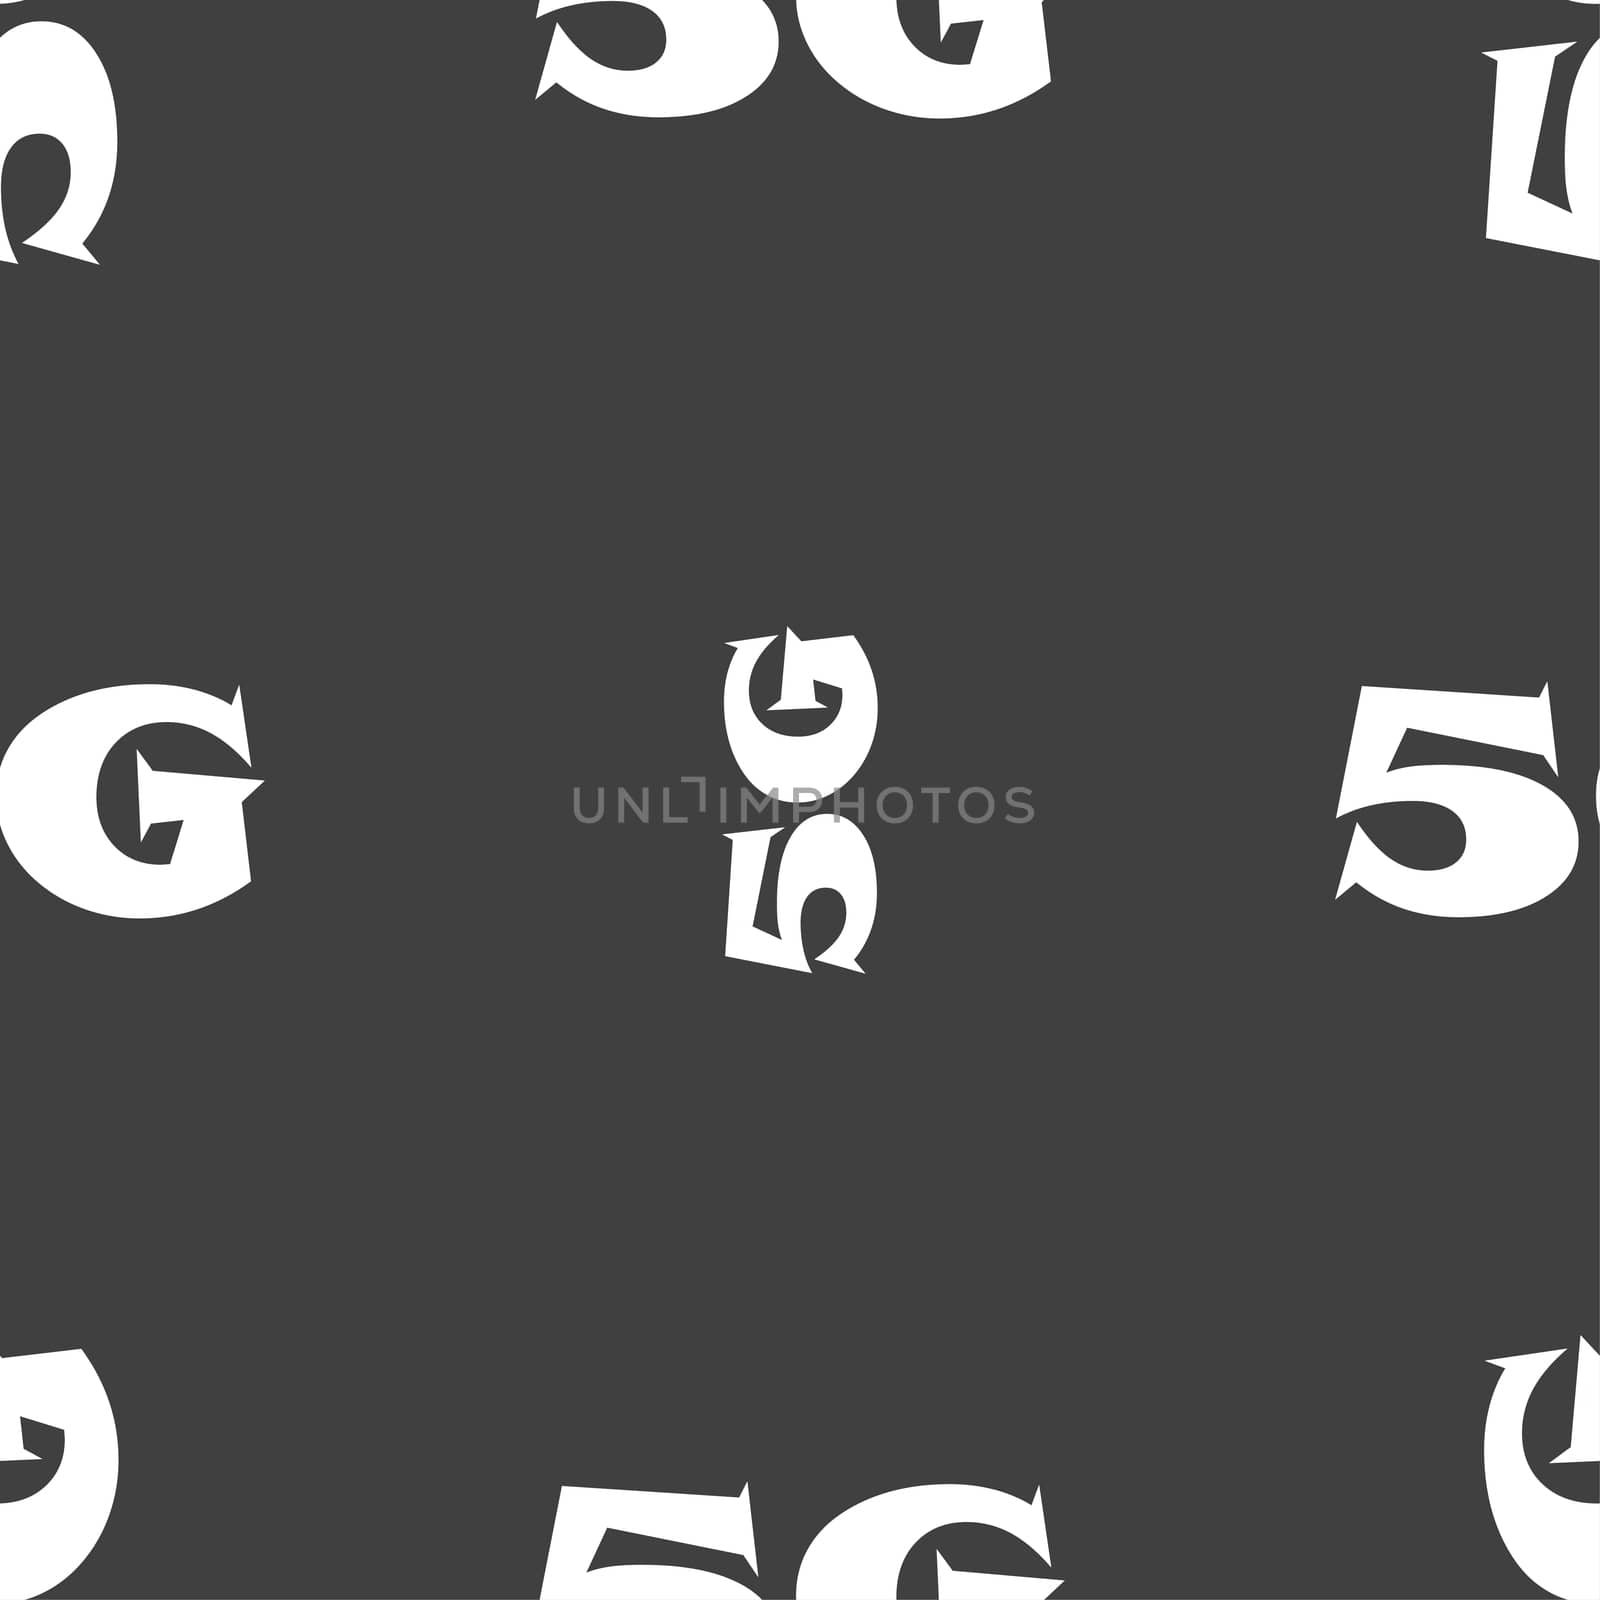 5G sign icon. Mobile telecommunications technology symbol. Seamless pattern on a gray background. illustration